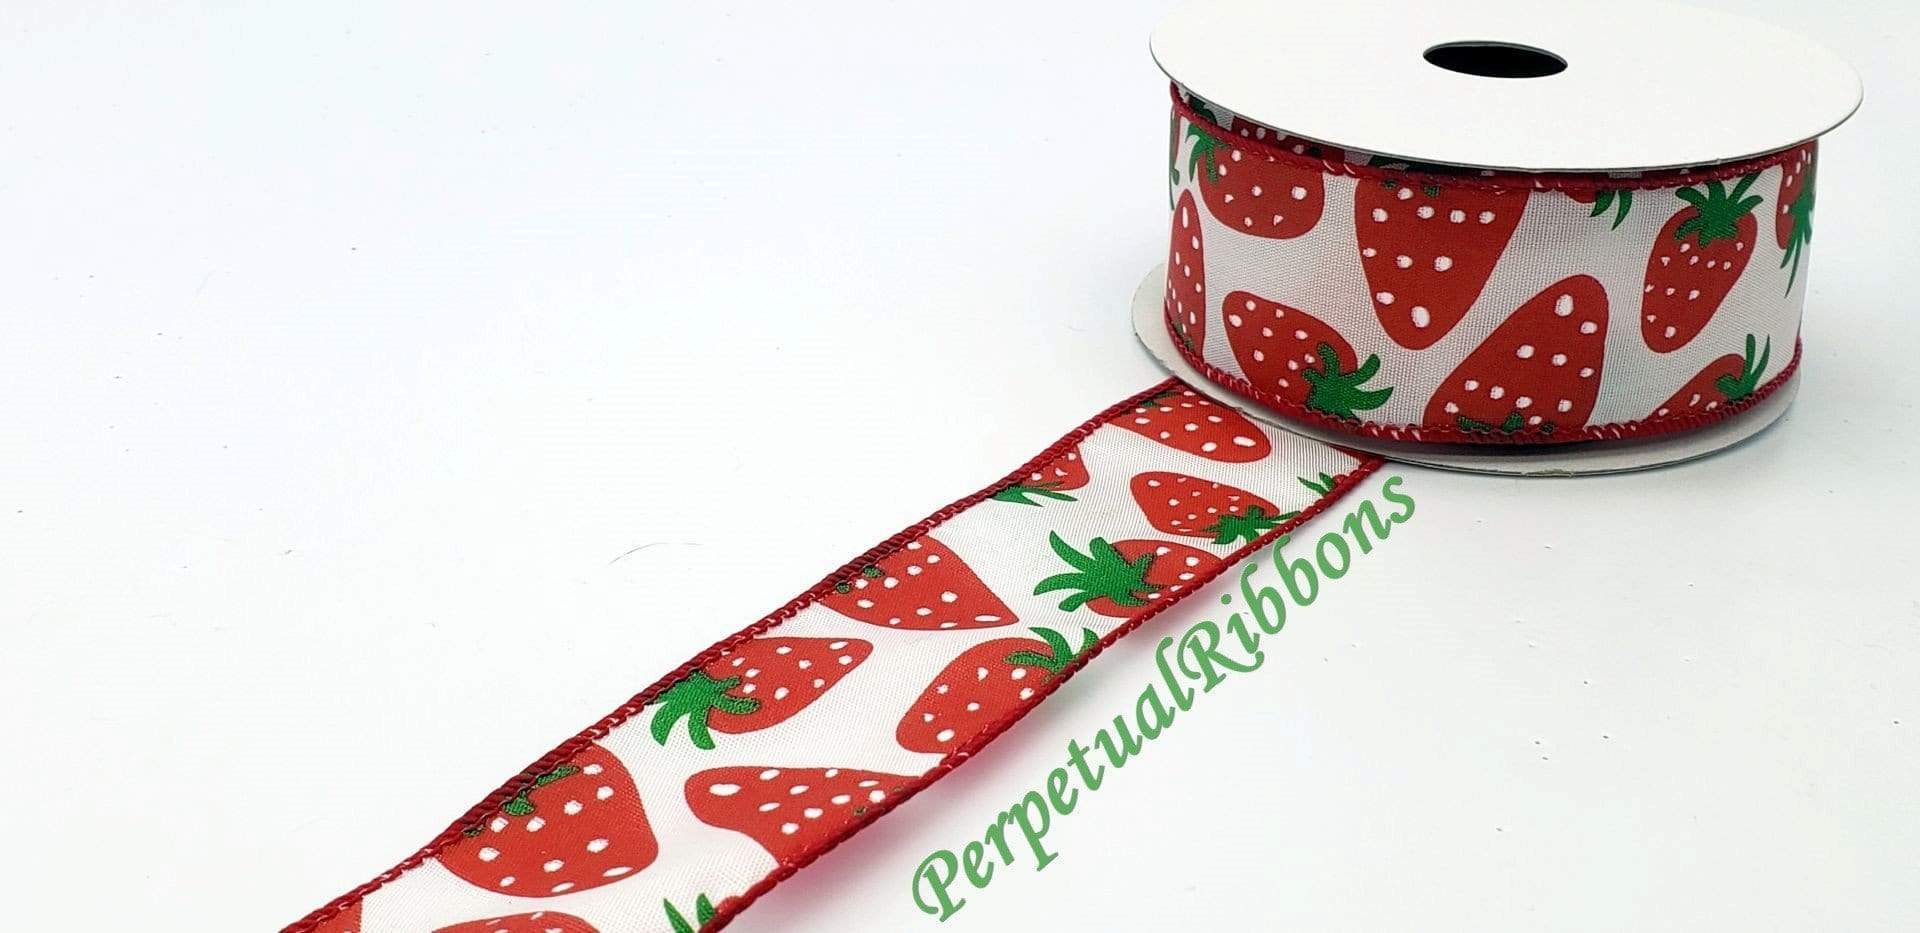 1.5 inch by 10 Yard White Satin with Strawberries Ribbon